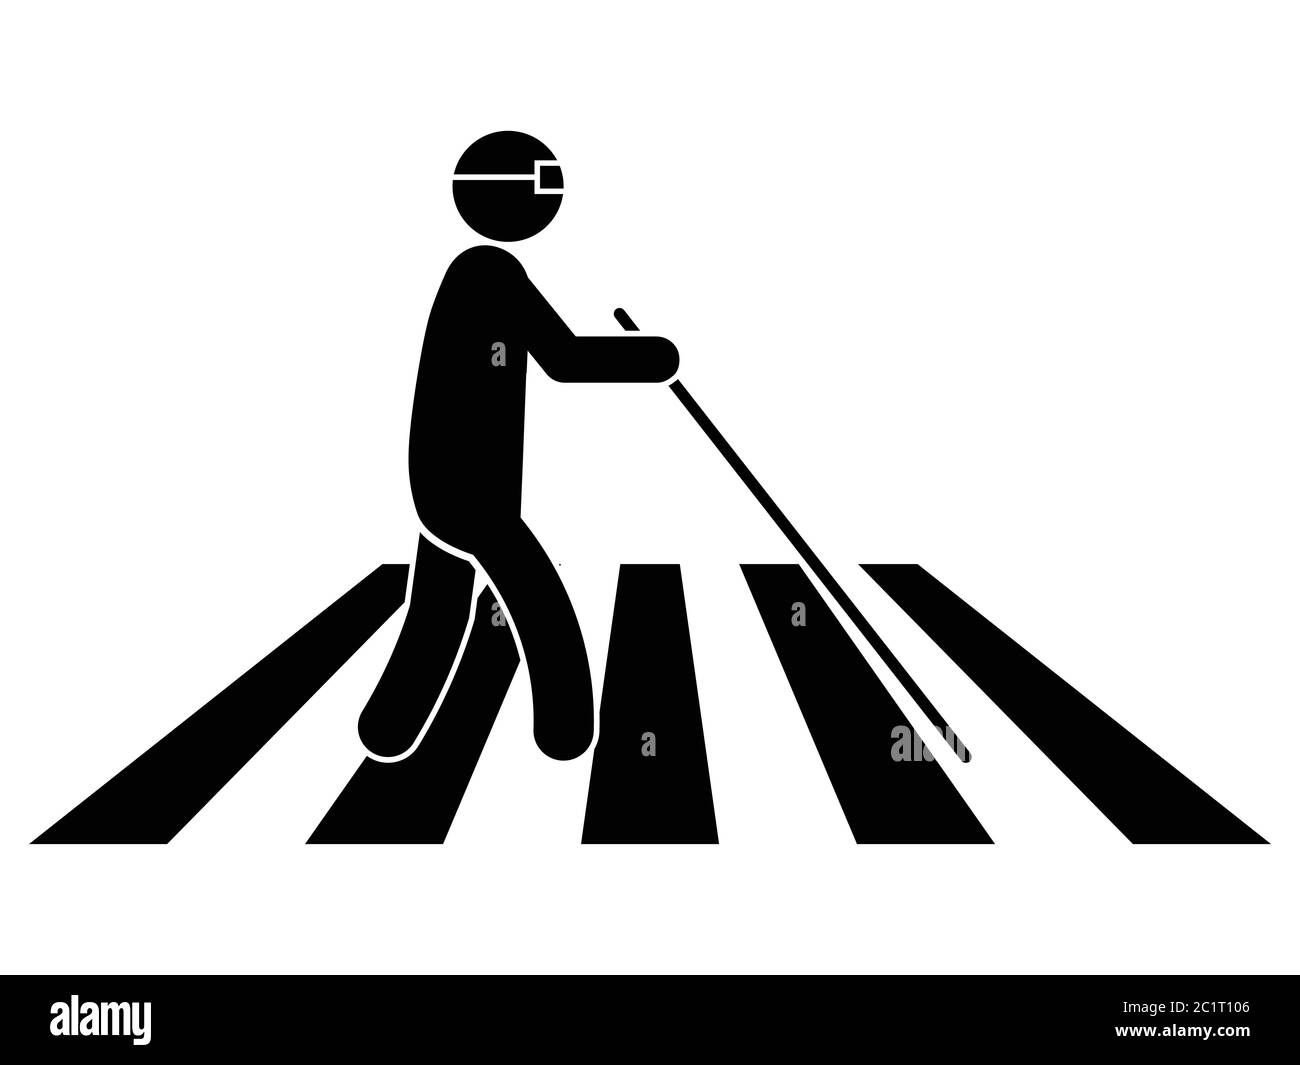 Blind Person on Crosswalk with White Cane Stick and Glasses. Black Illustration Isolated on a White Background. EPS Vector Stock Vector